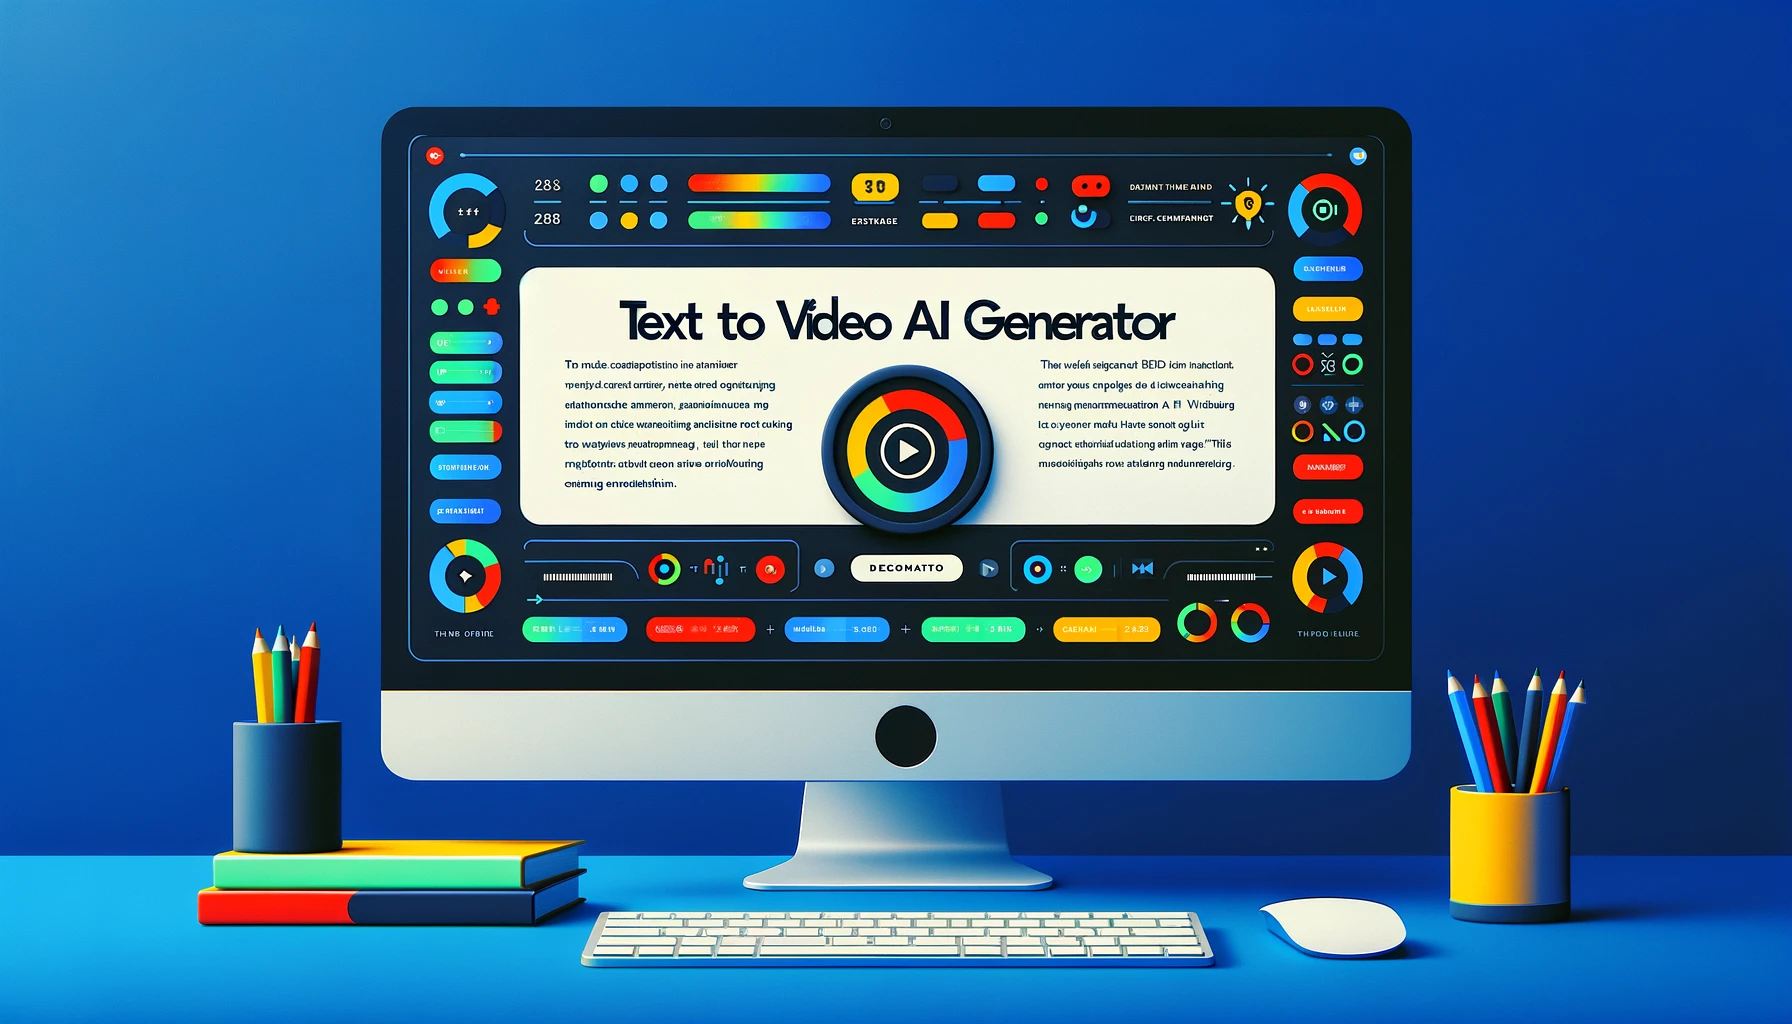 Text to Video AI Generator